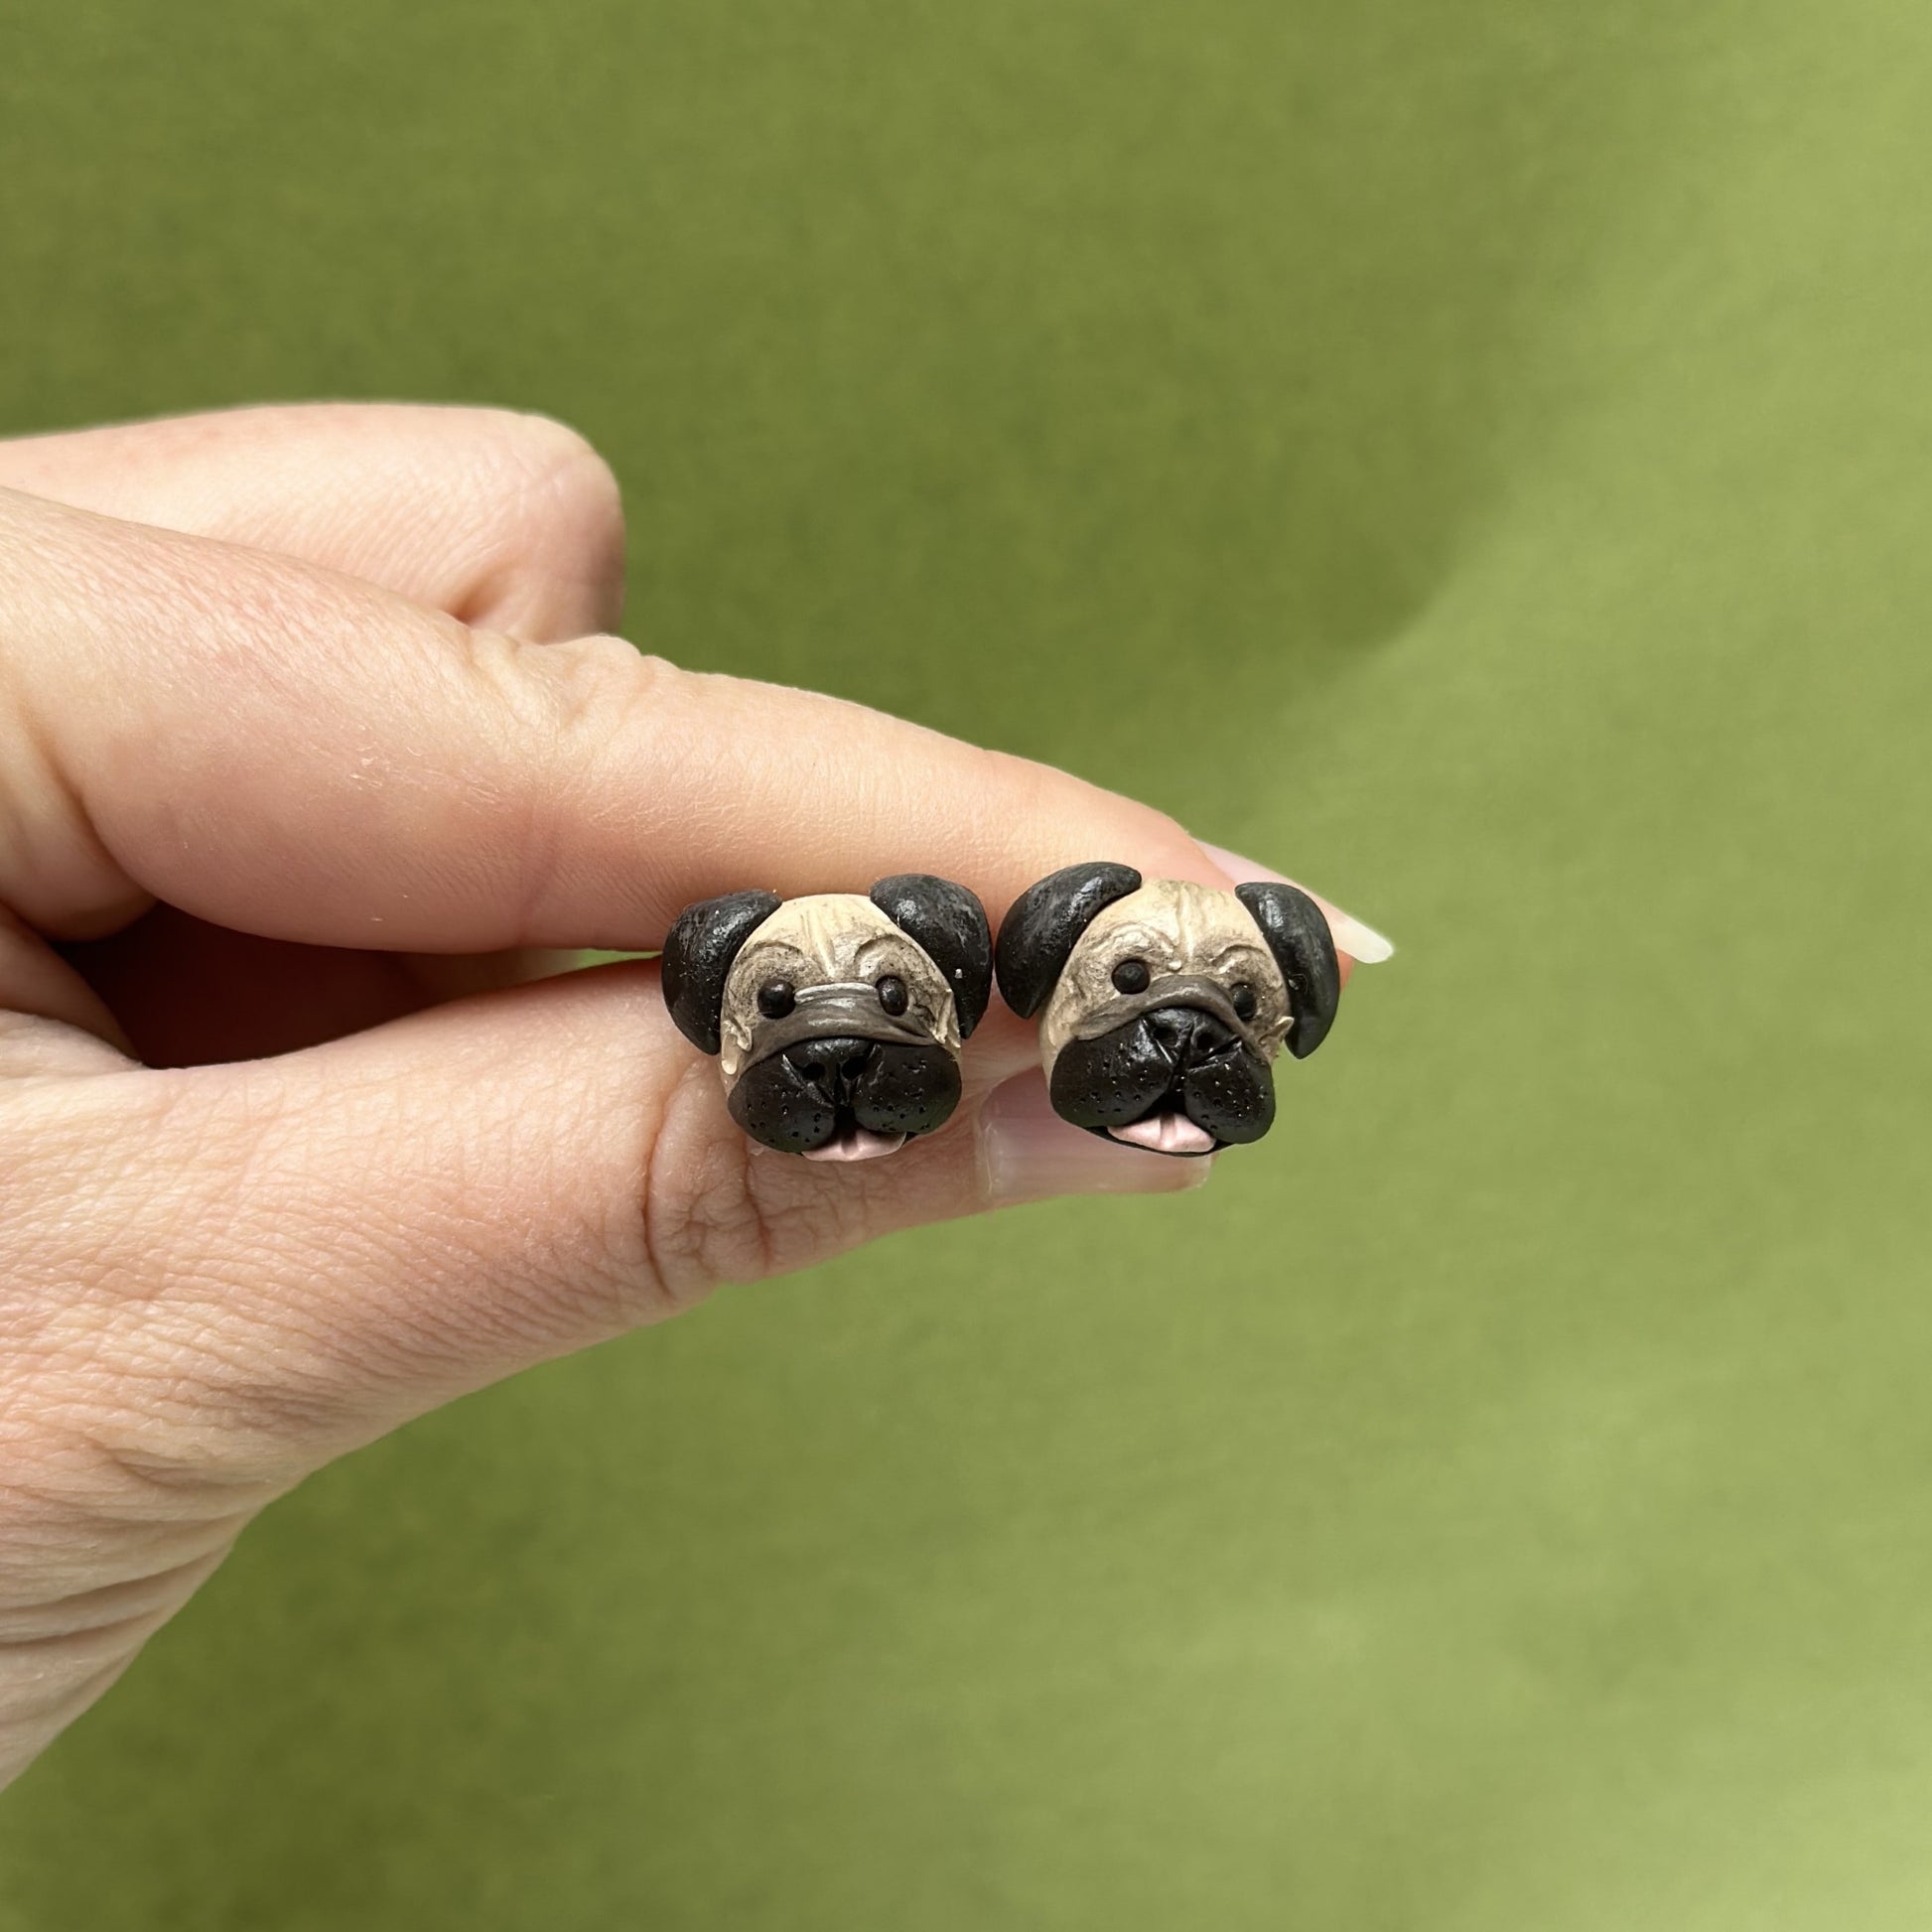 Handmade Pug stud earrings by Pawfect Love, positioned in front of green background